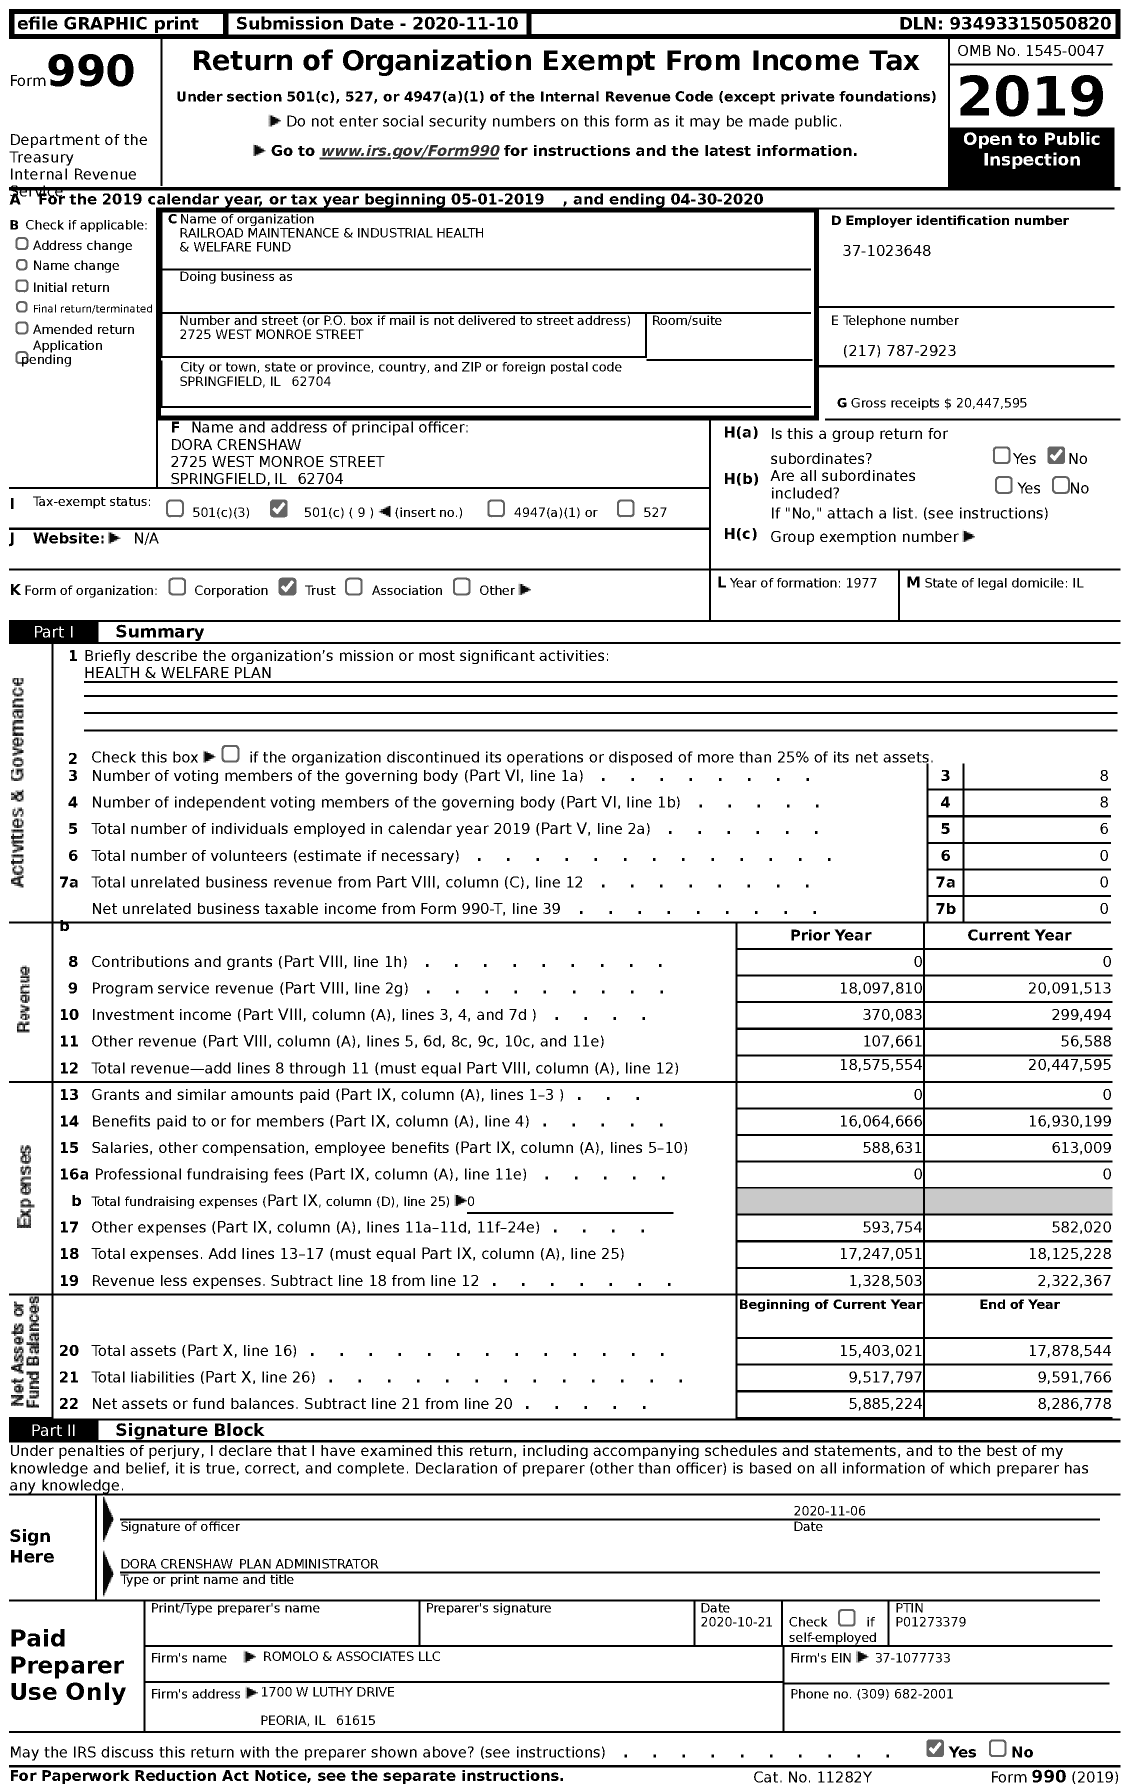 Image of first page of 2019 Form 990 for Railroad Maintenance and Industrial Health and Welfare Fund